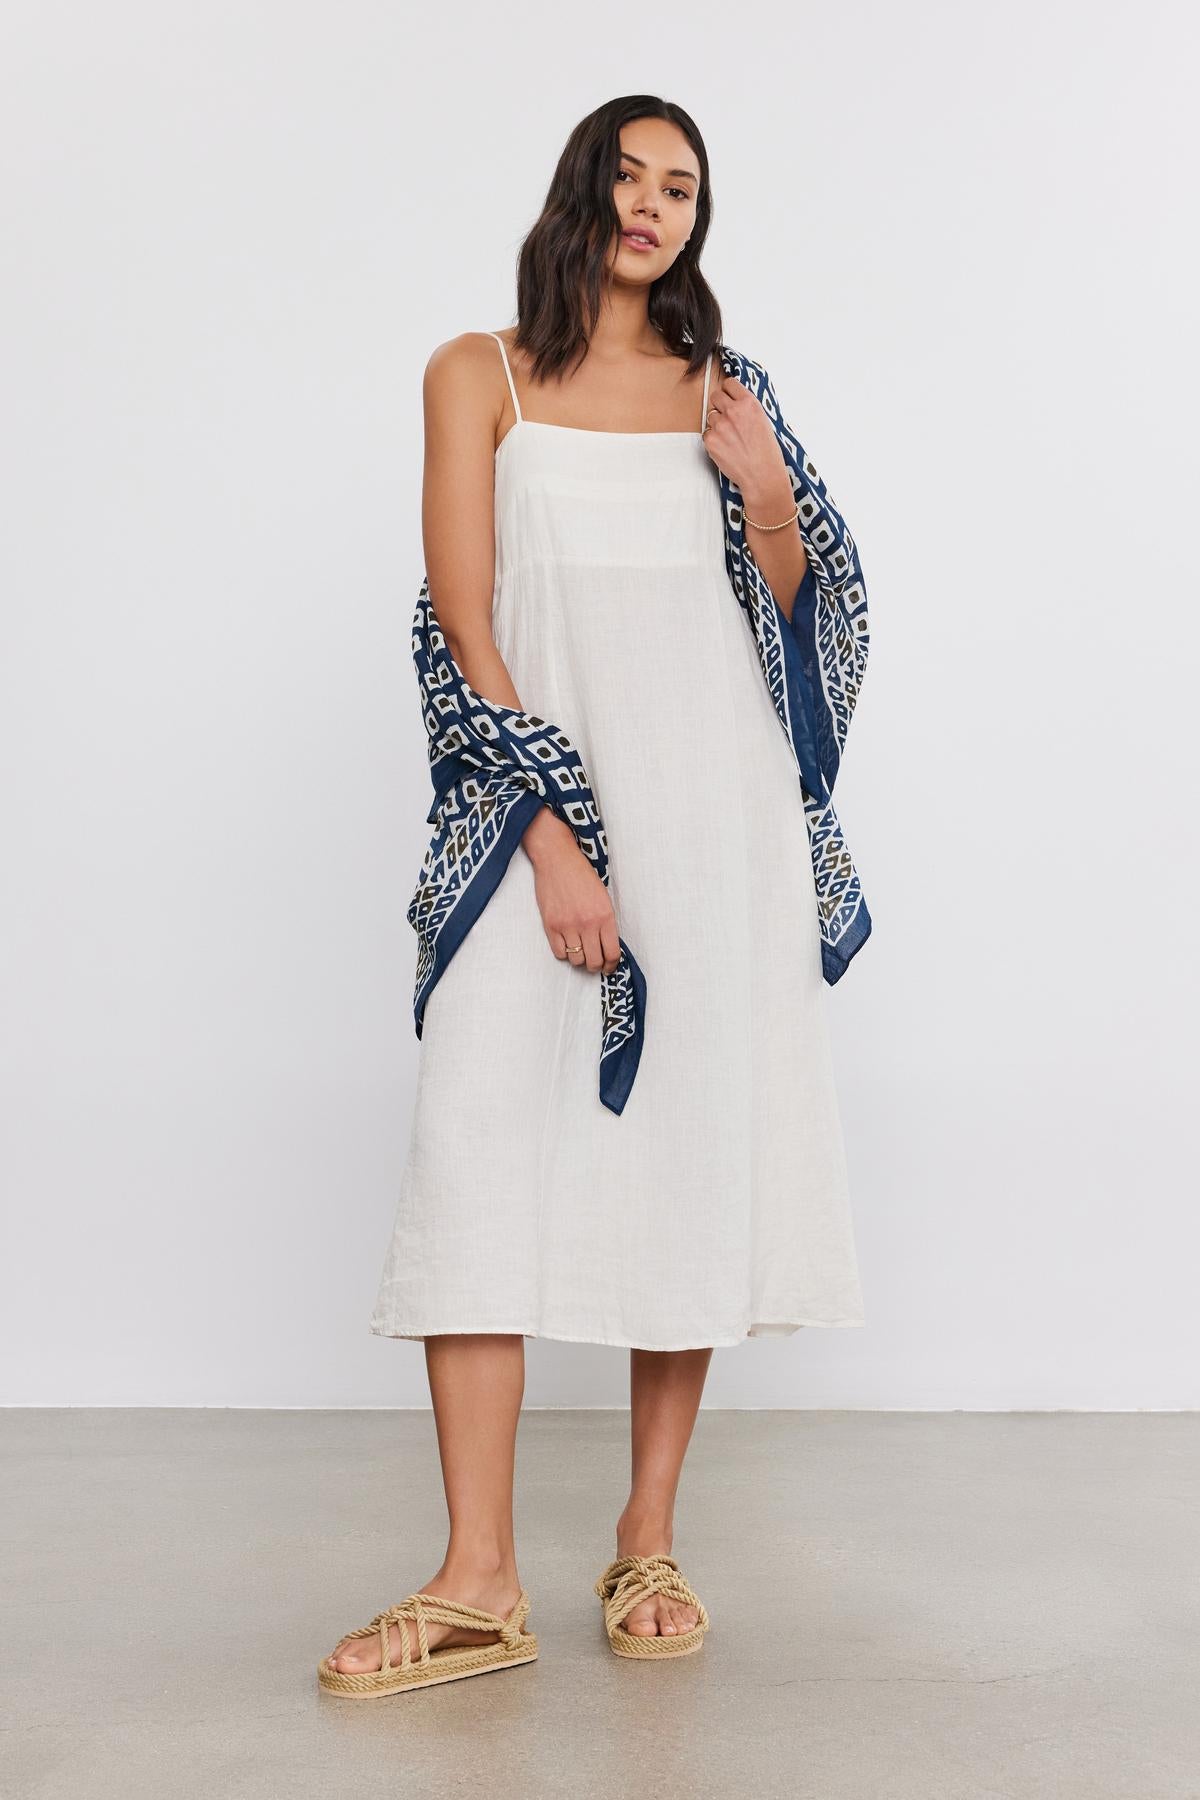 A woman in a white midi dress and patterned blue scarf stands confidently, holding the Velvet by Graham & Spencer sarong wrap with one hand, and wearing gold sandals.-36752950526145